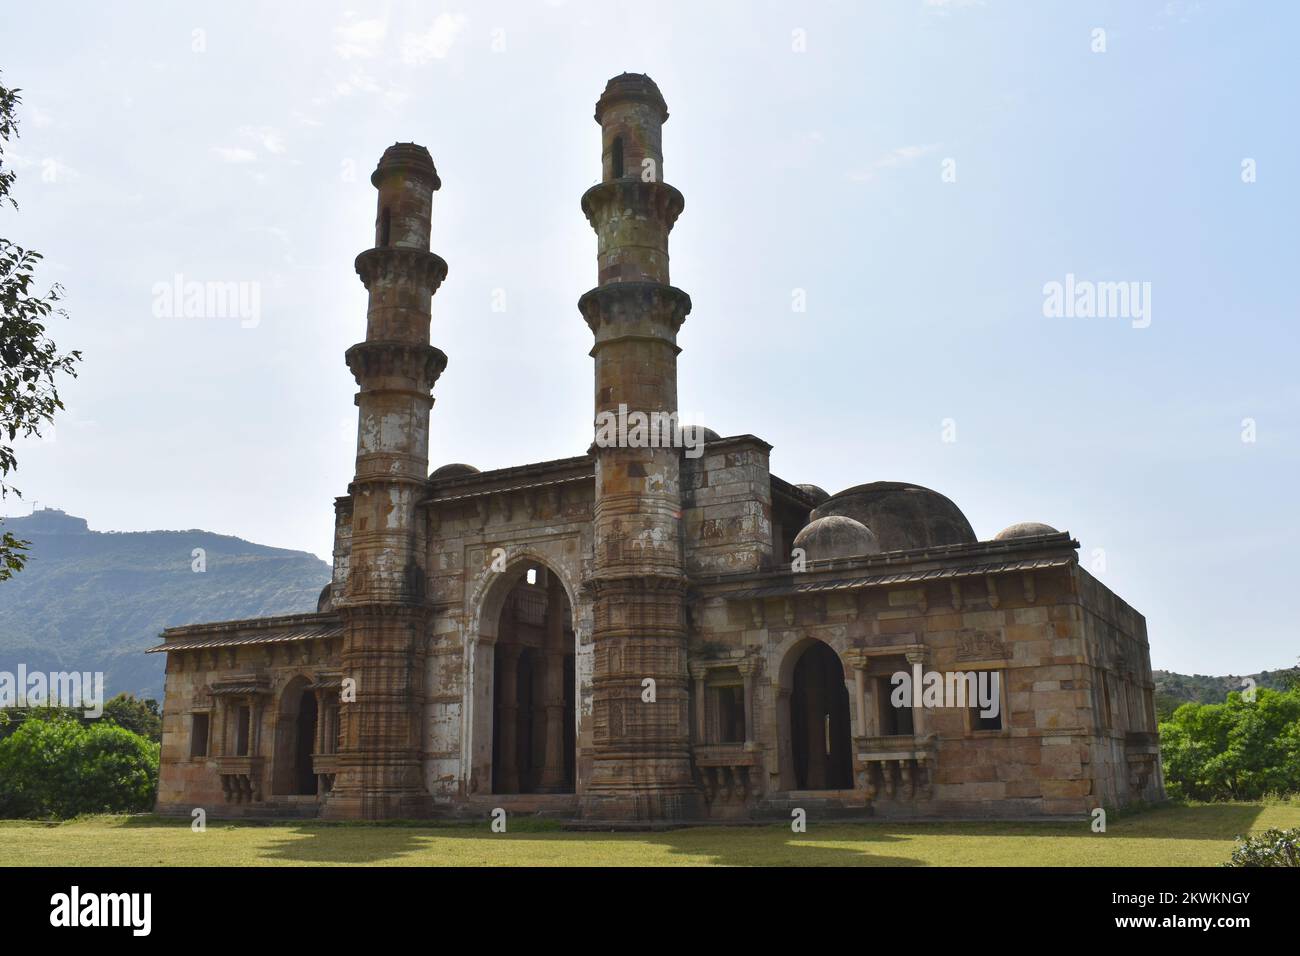 Kevda Masjid, built in stone and carvings details of architecture, an Islamic monument was built by Sultan Mahmud Begada 15th - 16th century. A UNESCO Stock Photo